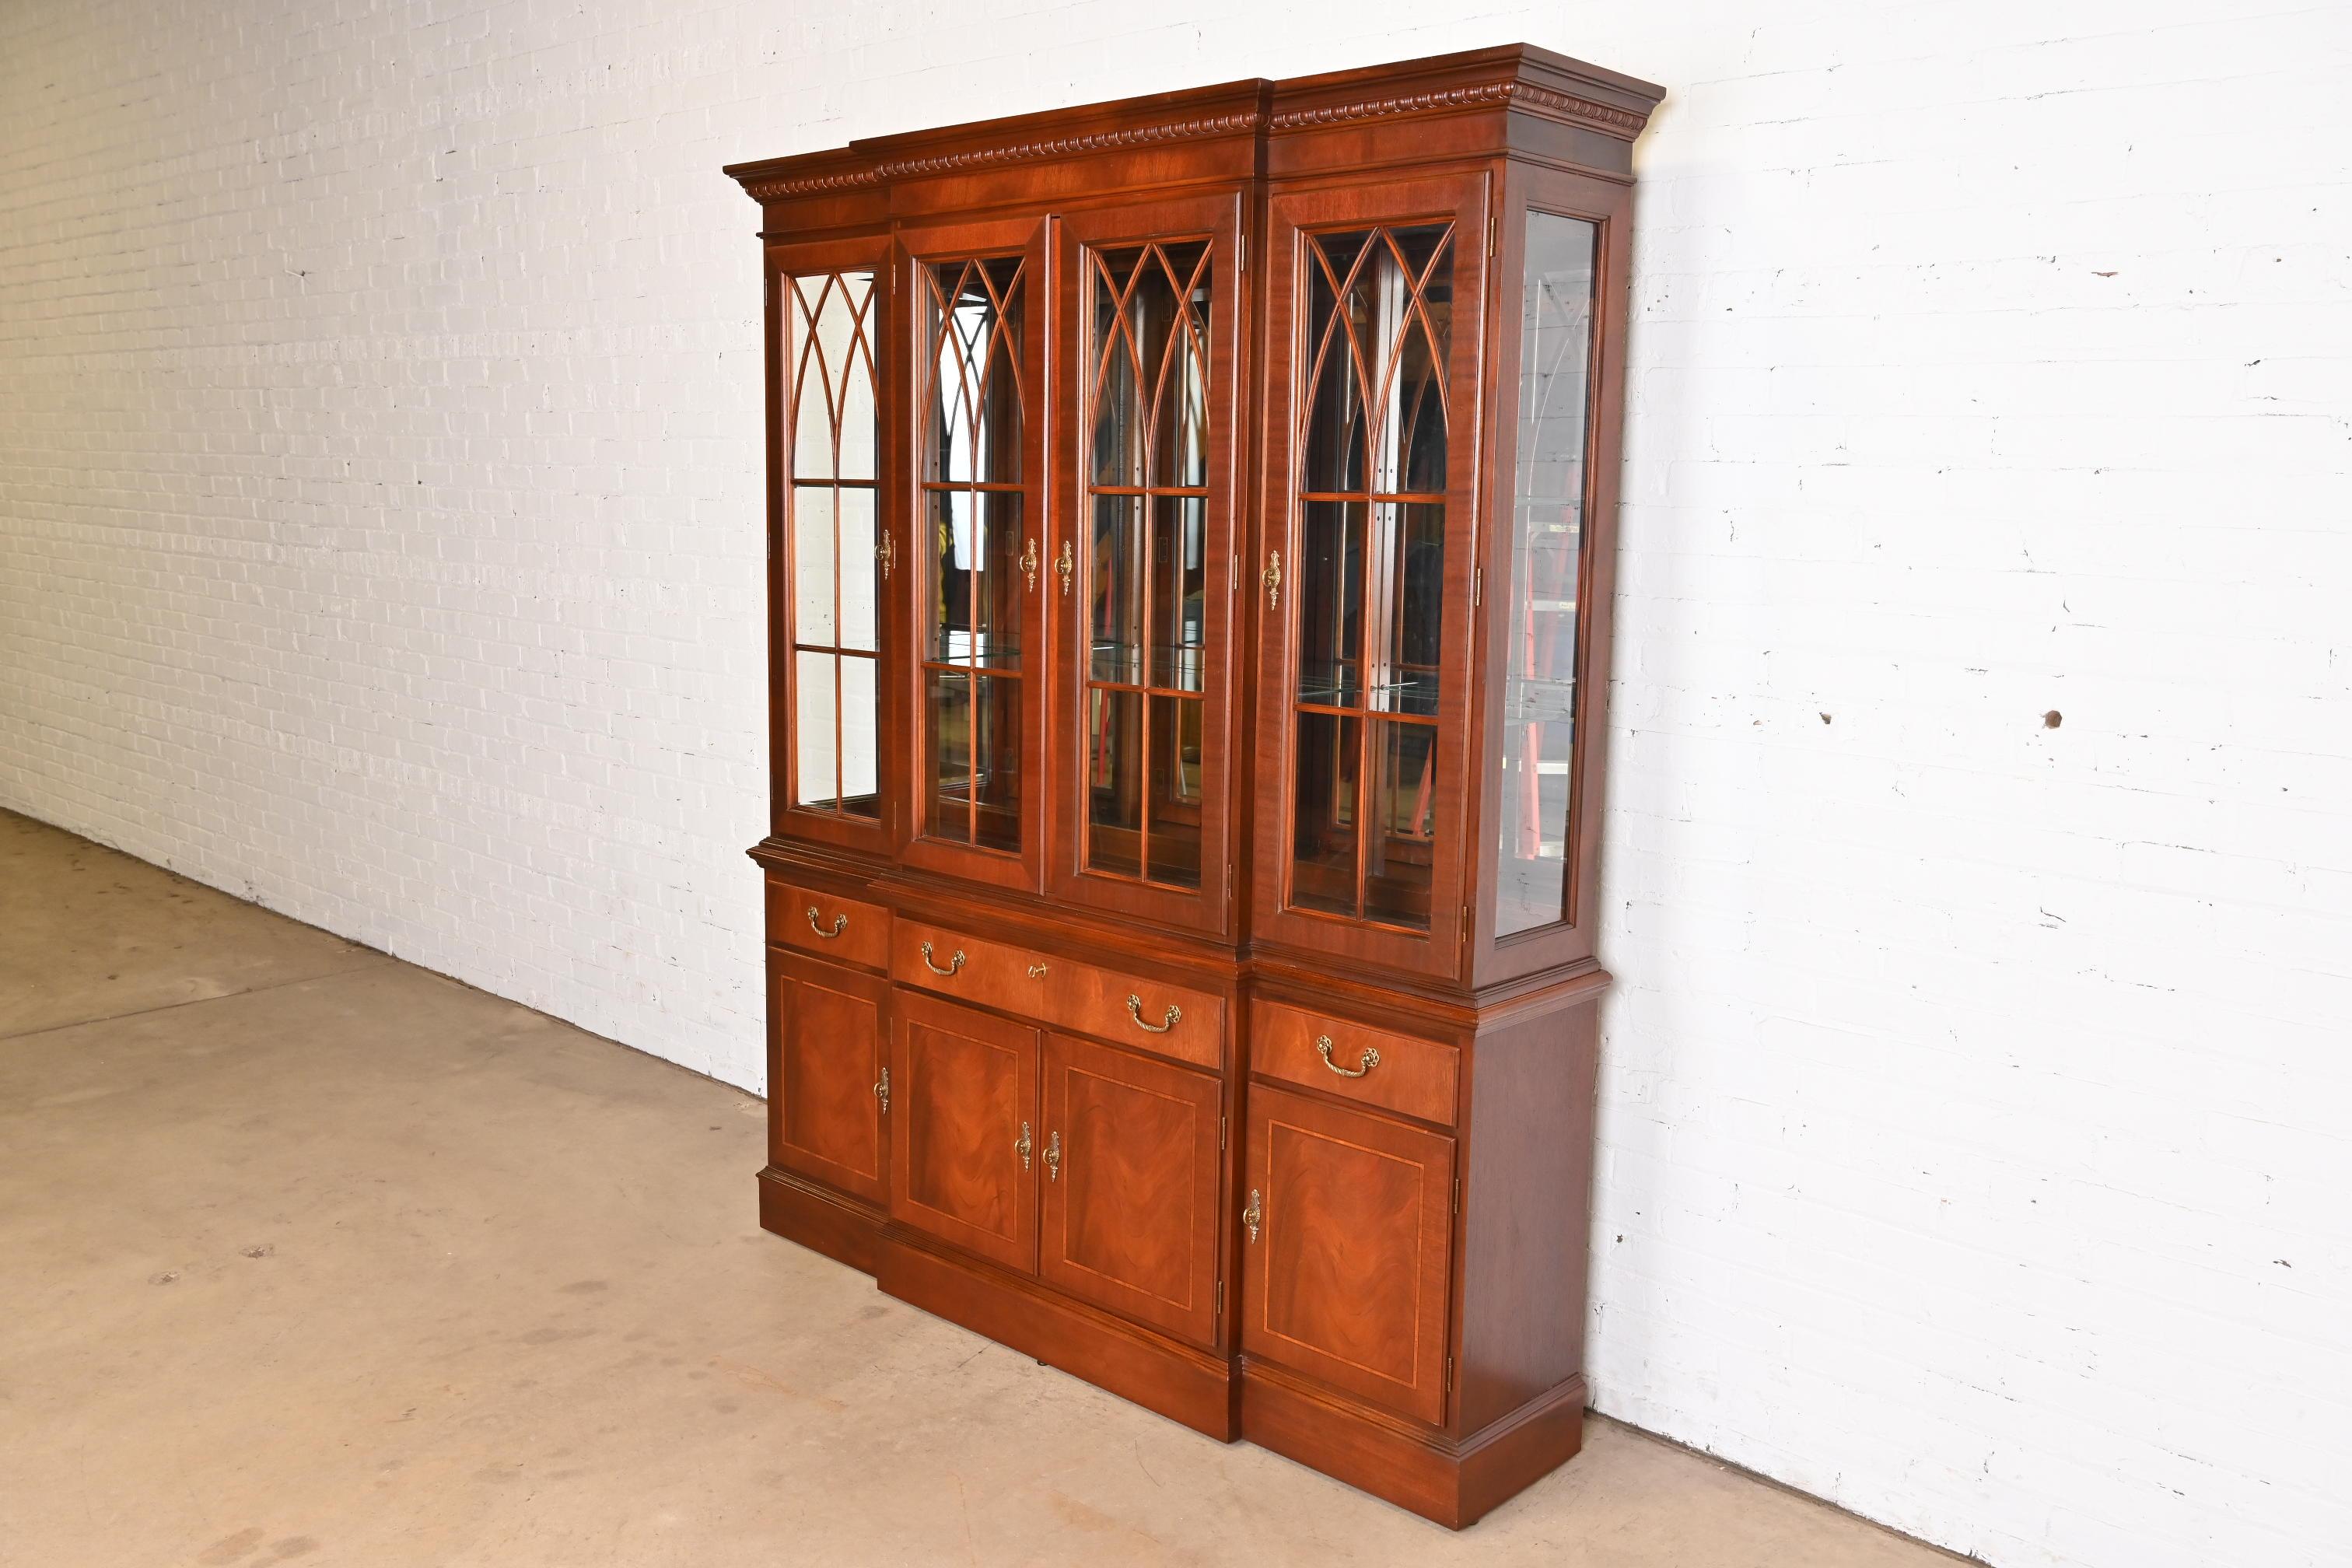 Georgian Inlaid Mahogany Lighted Breakfront Bookcase Cabinet In Good Condition For Sale In South Bend, IN